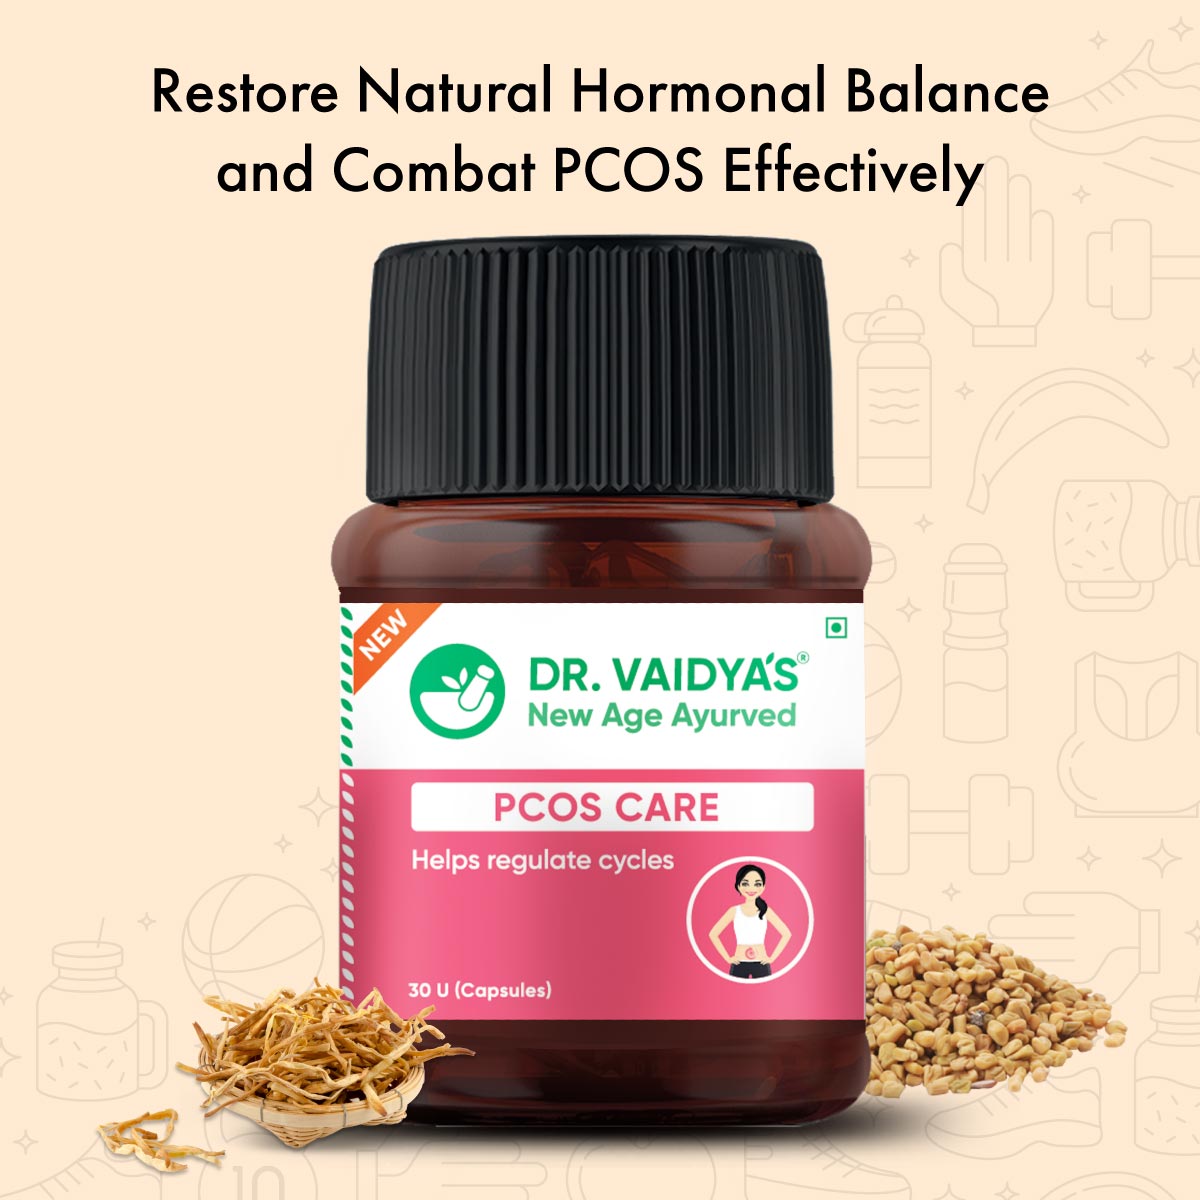 PCOS Care Capsules: For better hormonal balance & regularizing periods